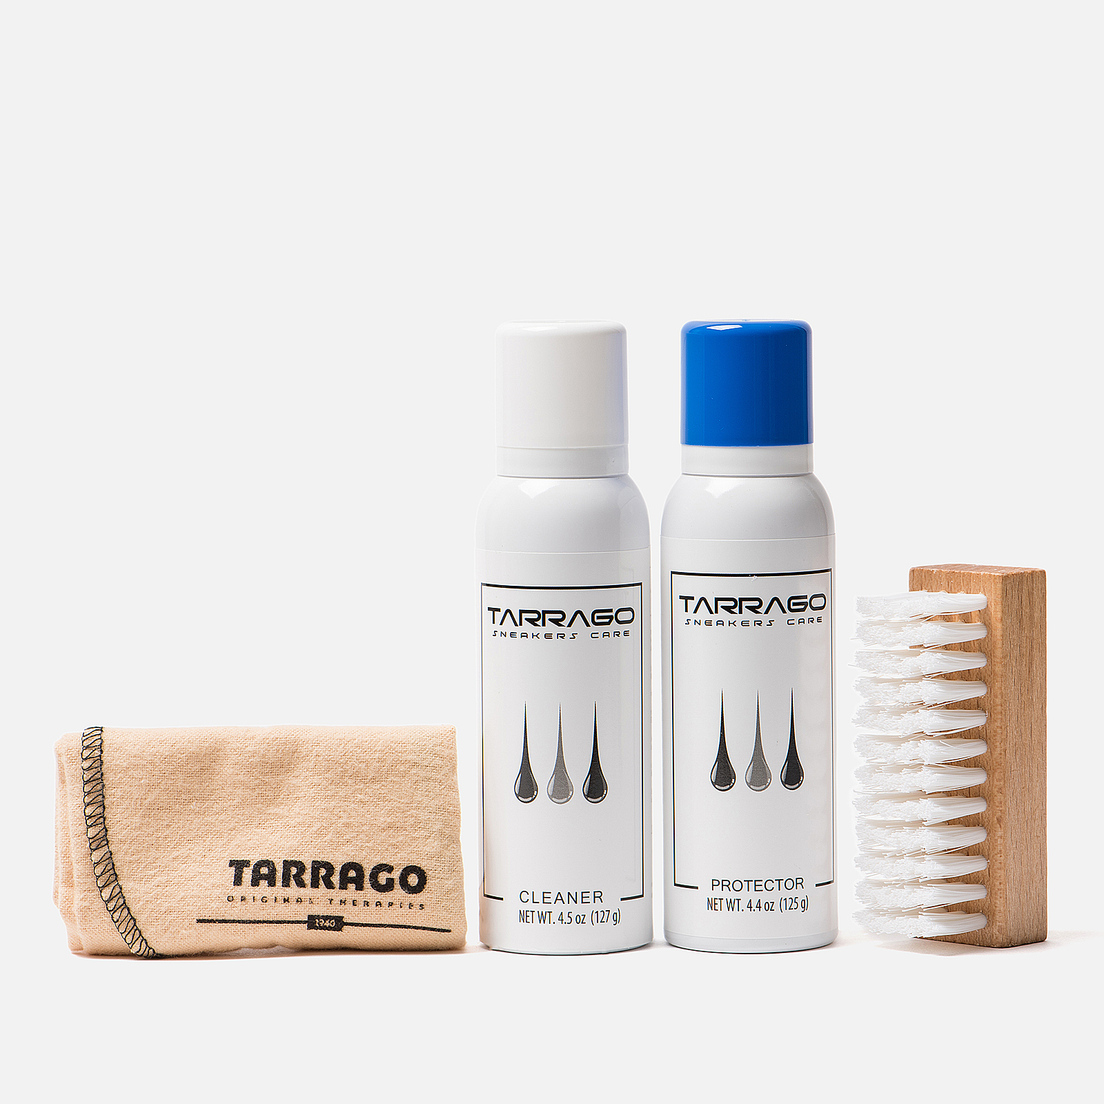 Tarrago Sneakers Care Набор для ухода за обувью Sneakers Kit Clean And Protect 4 Pieces